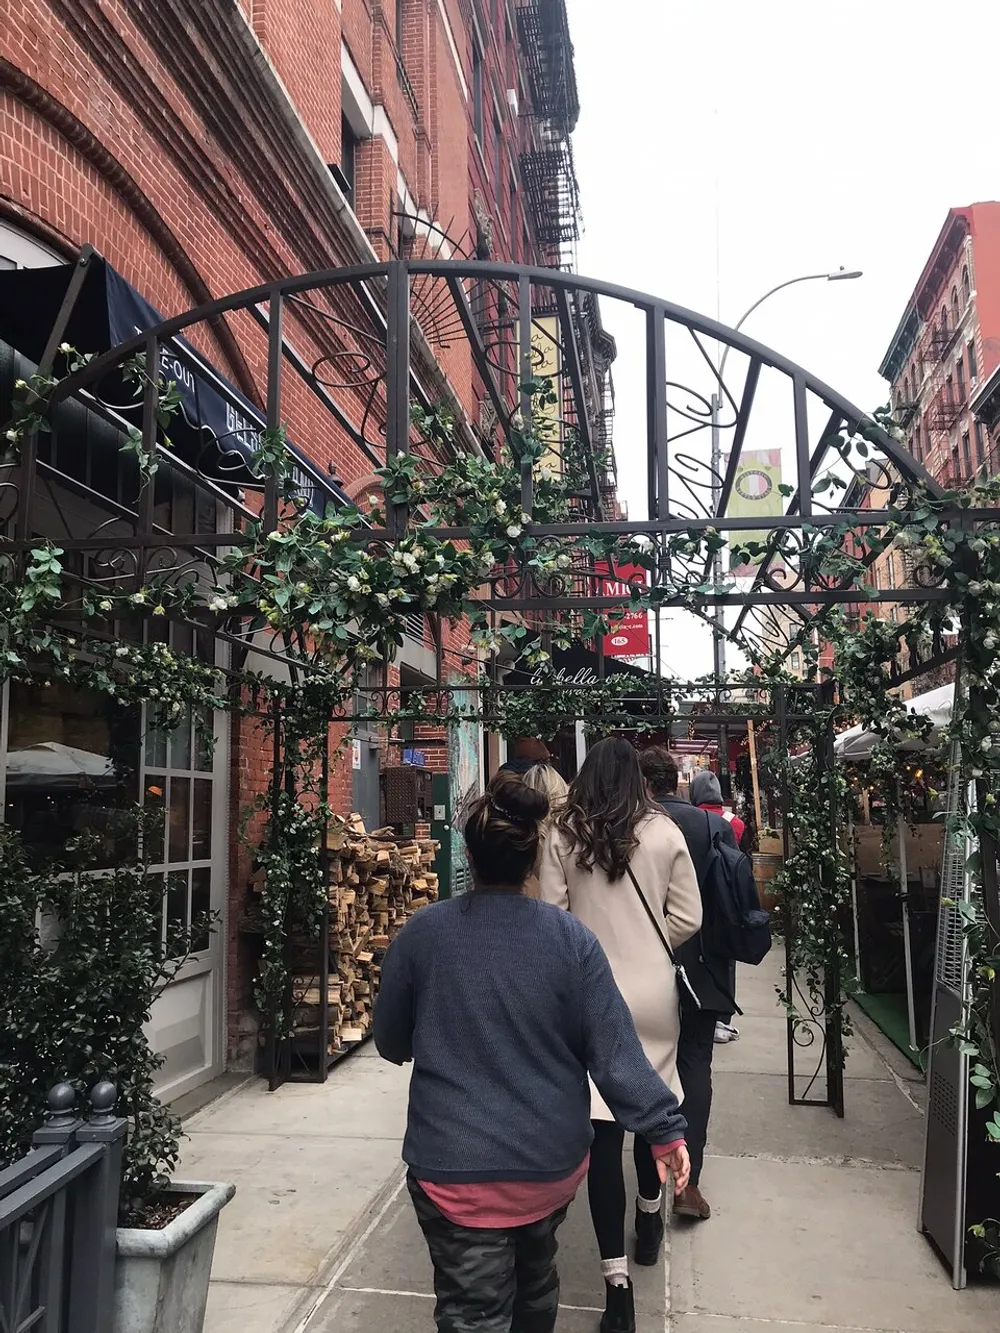 People walk down a charming city street adorned with a decorative vine-covered archway giving a cozy ambiance